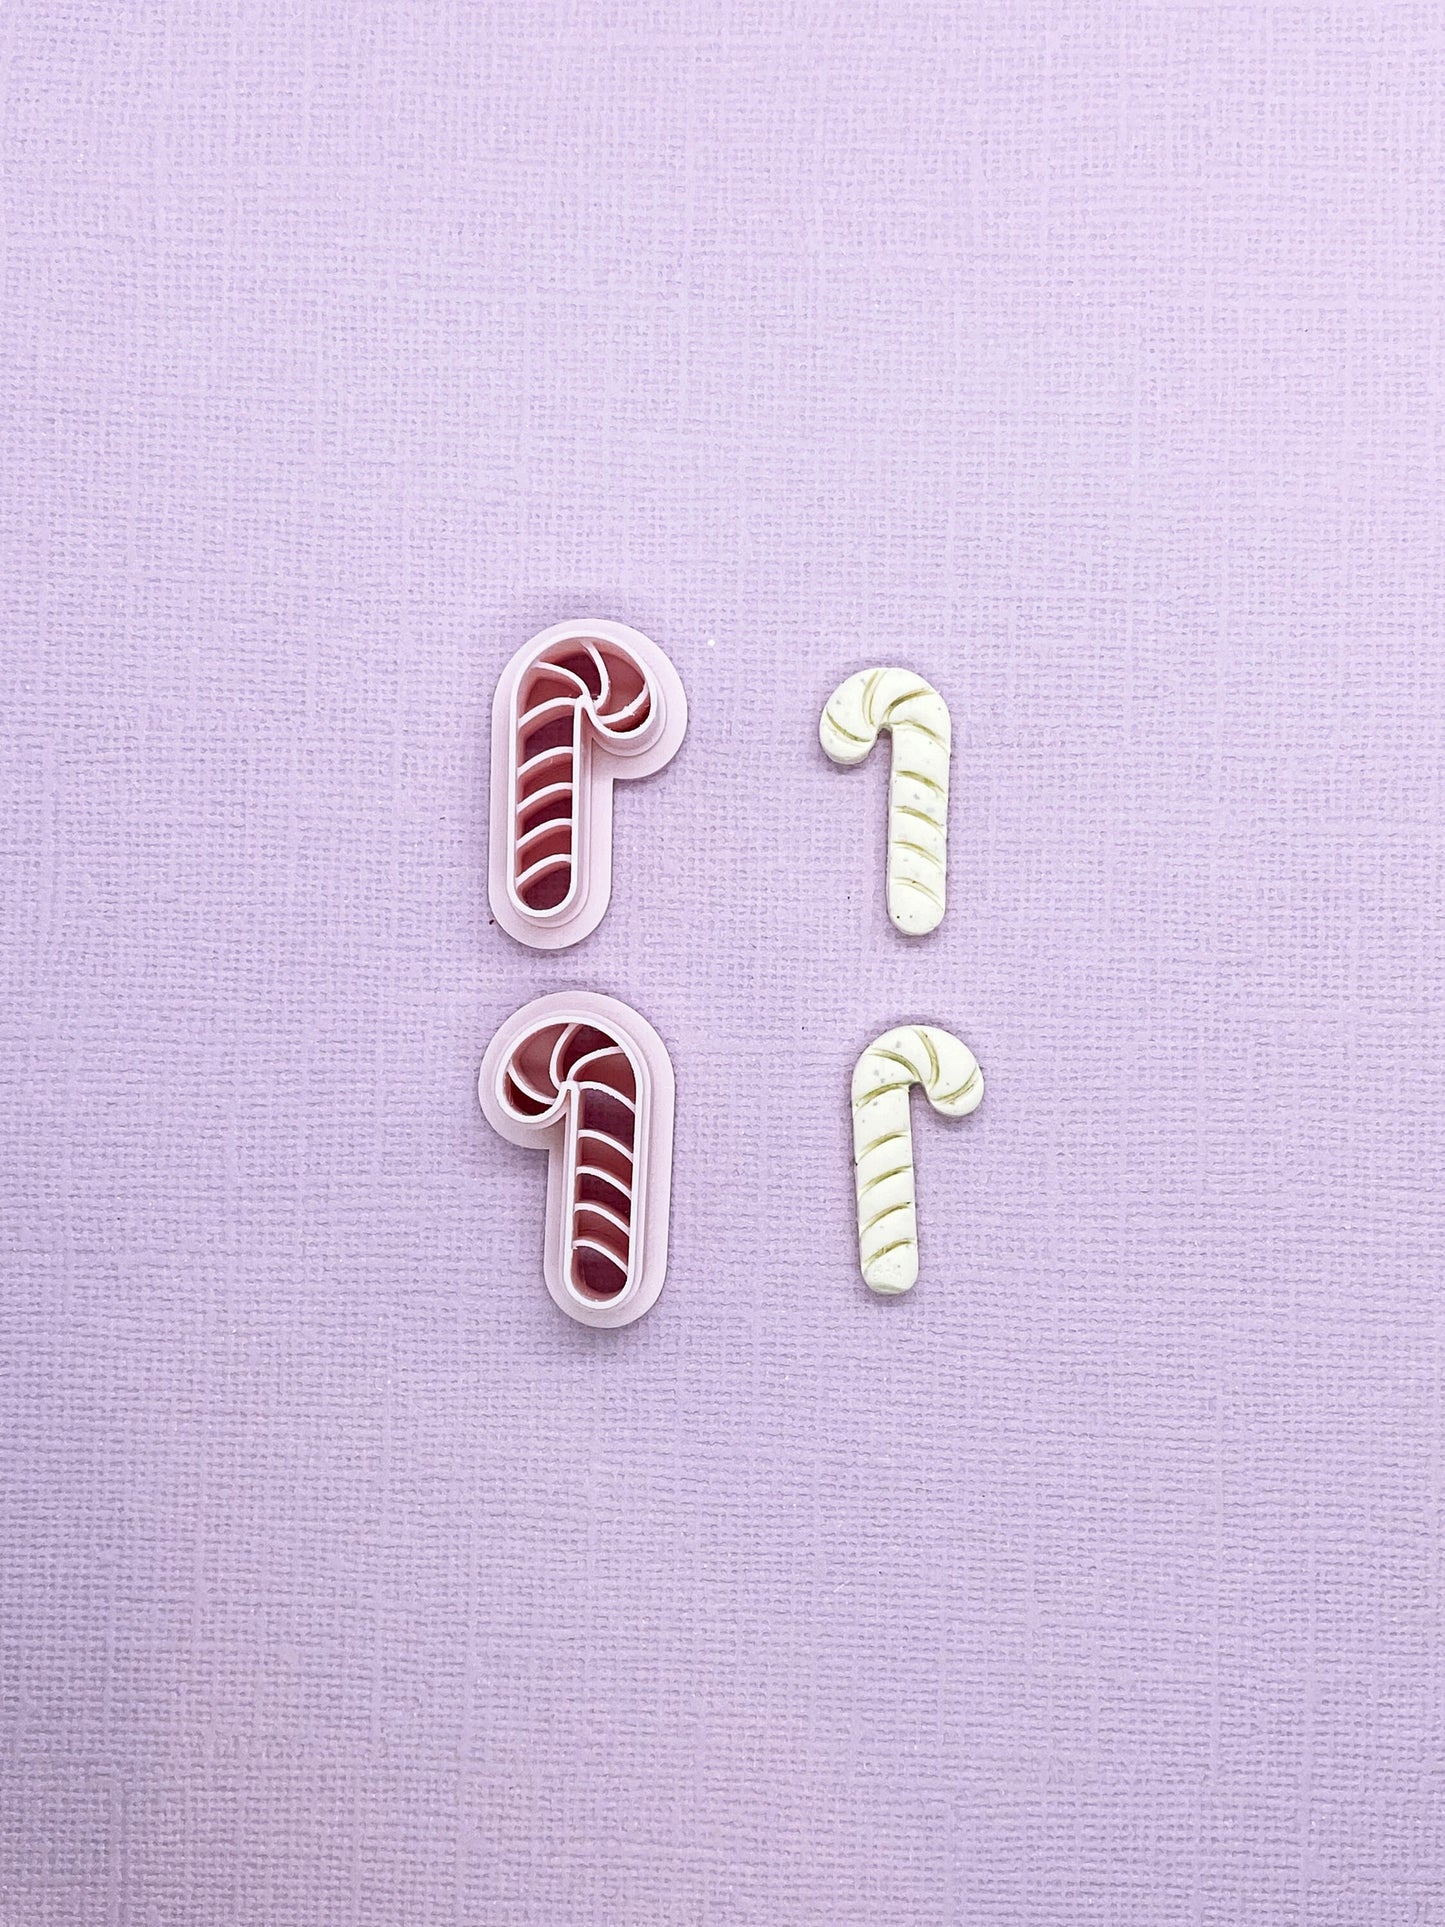 Striped Candy Cane Clay Cutter MIRRORED